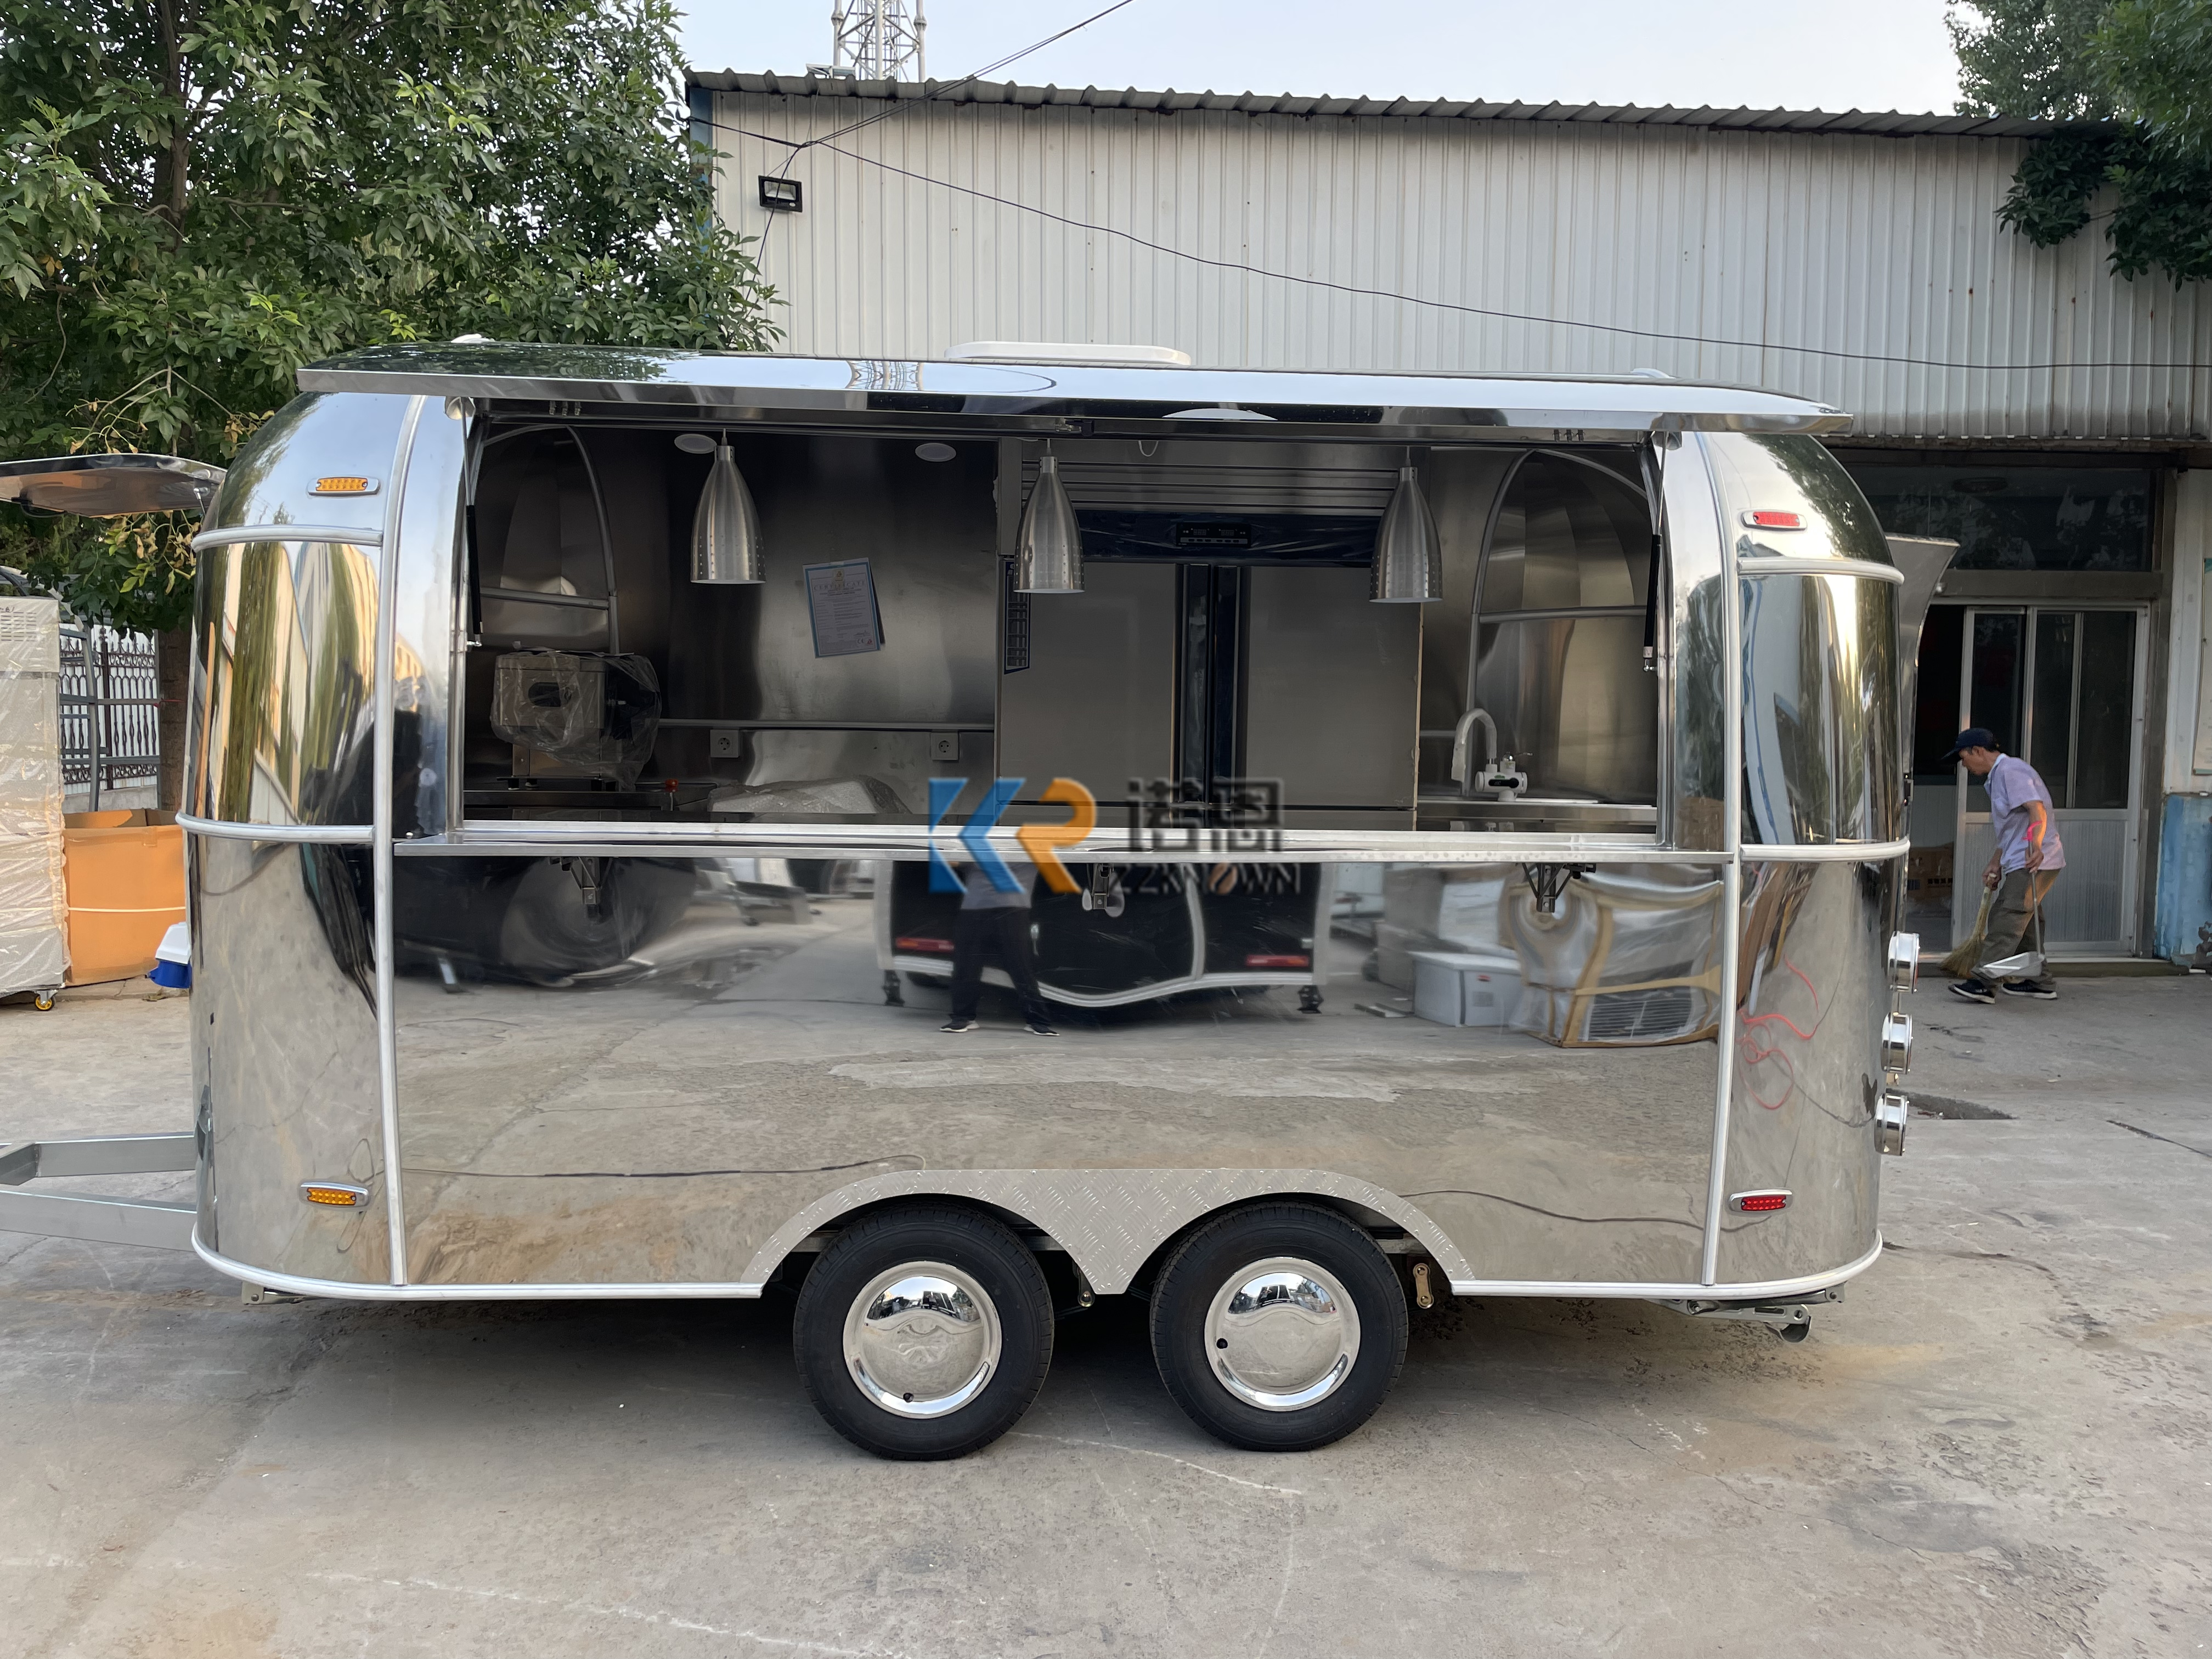 KN-QF-400BT Fully Equipped Mobile Kitchen Food Truck Hot Dog Food Stand Cart Bike Trailer Mobile Fast Stainless Steel Food Trailer